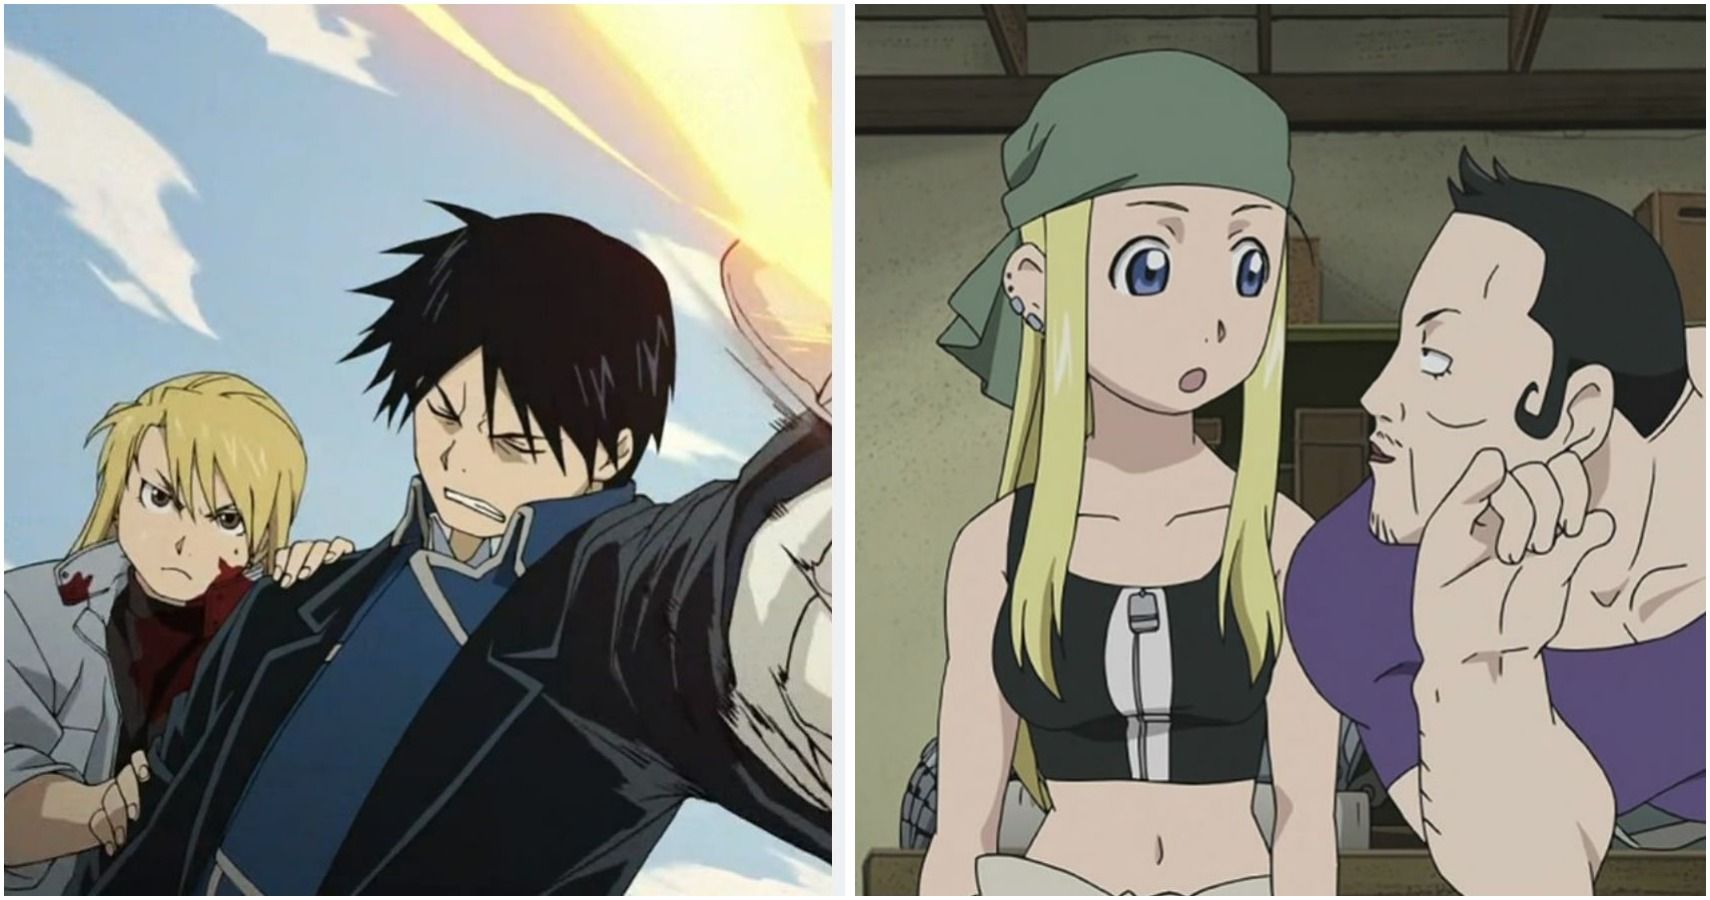 FMAB fans are on their way : r/Animemes